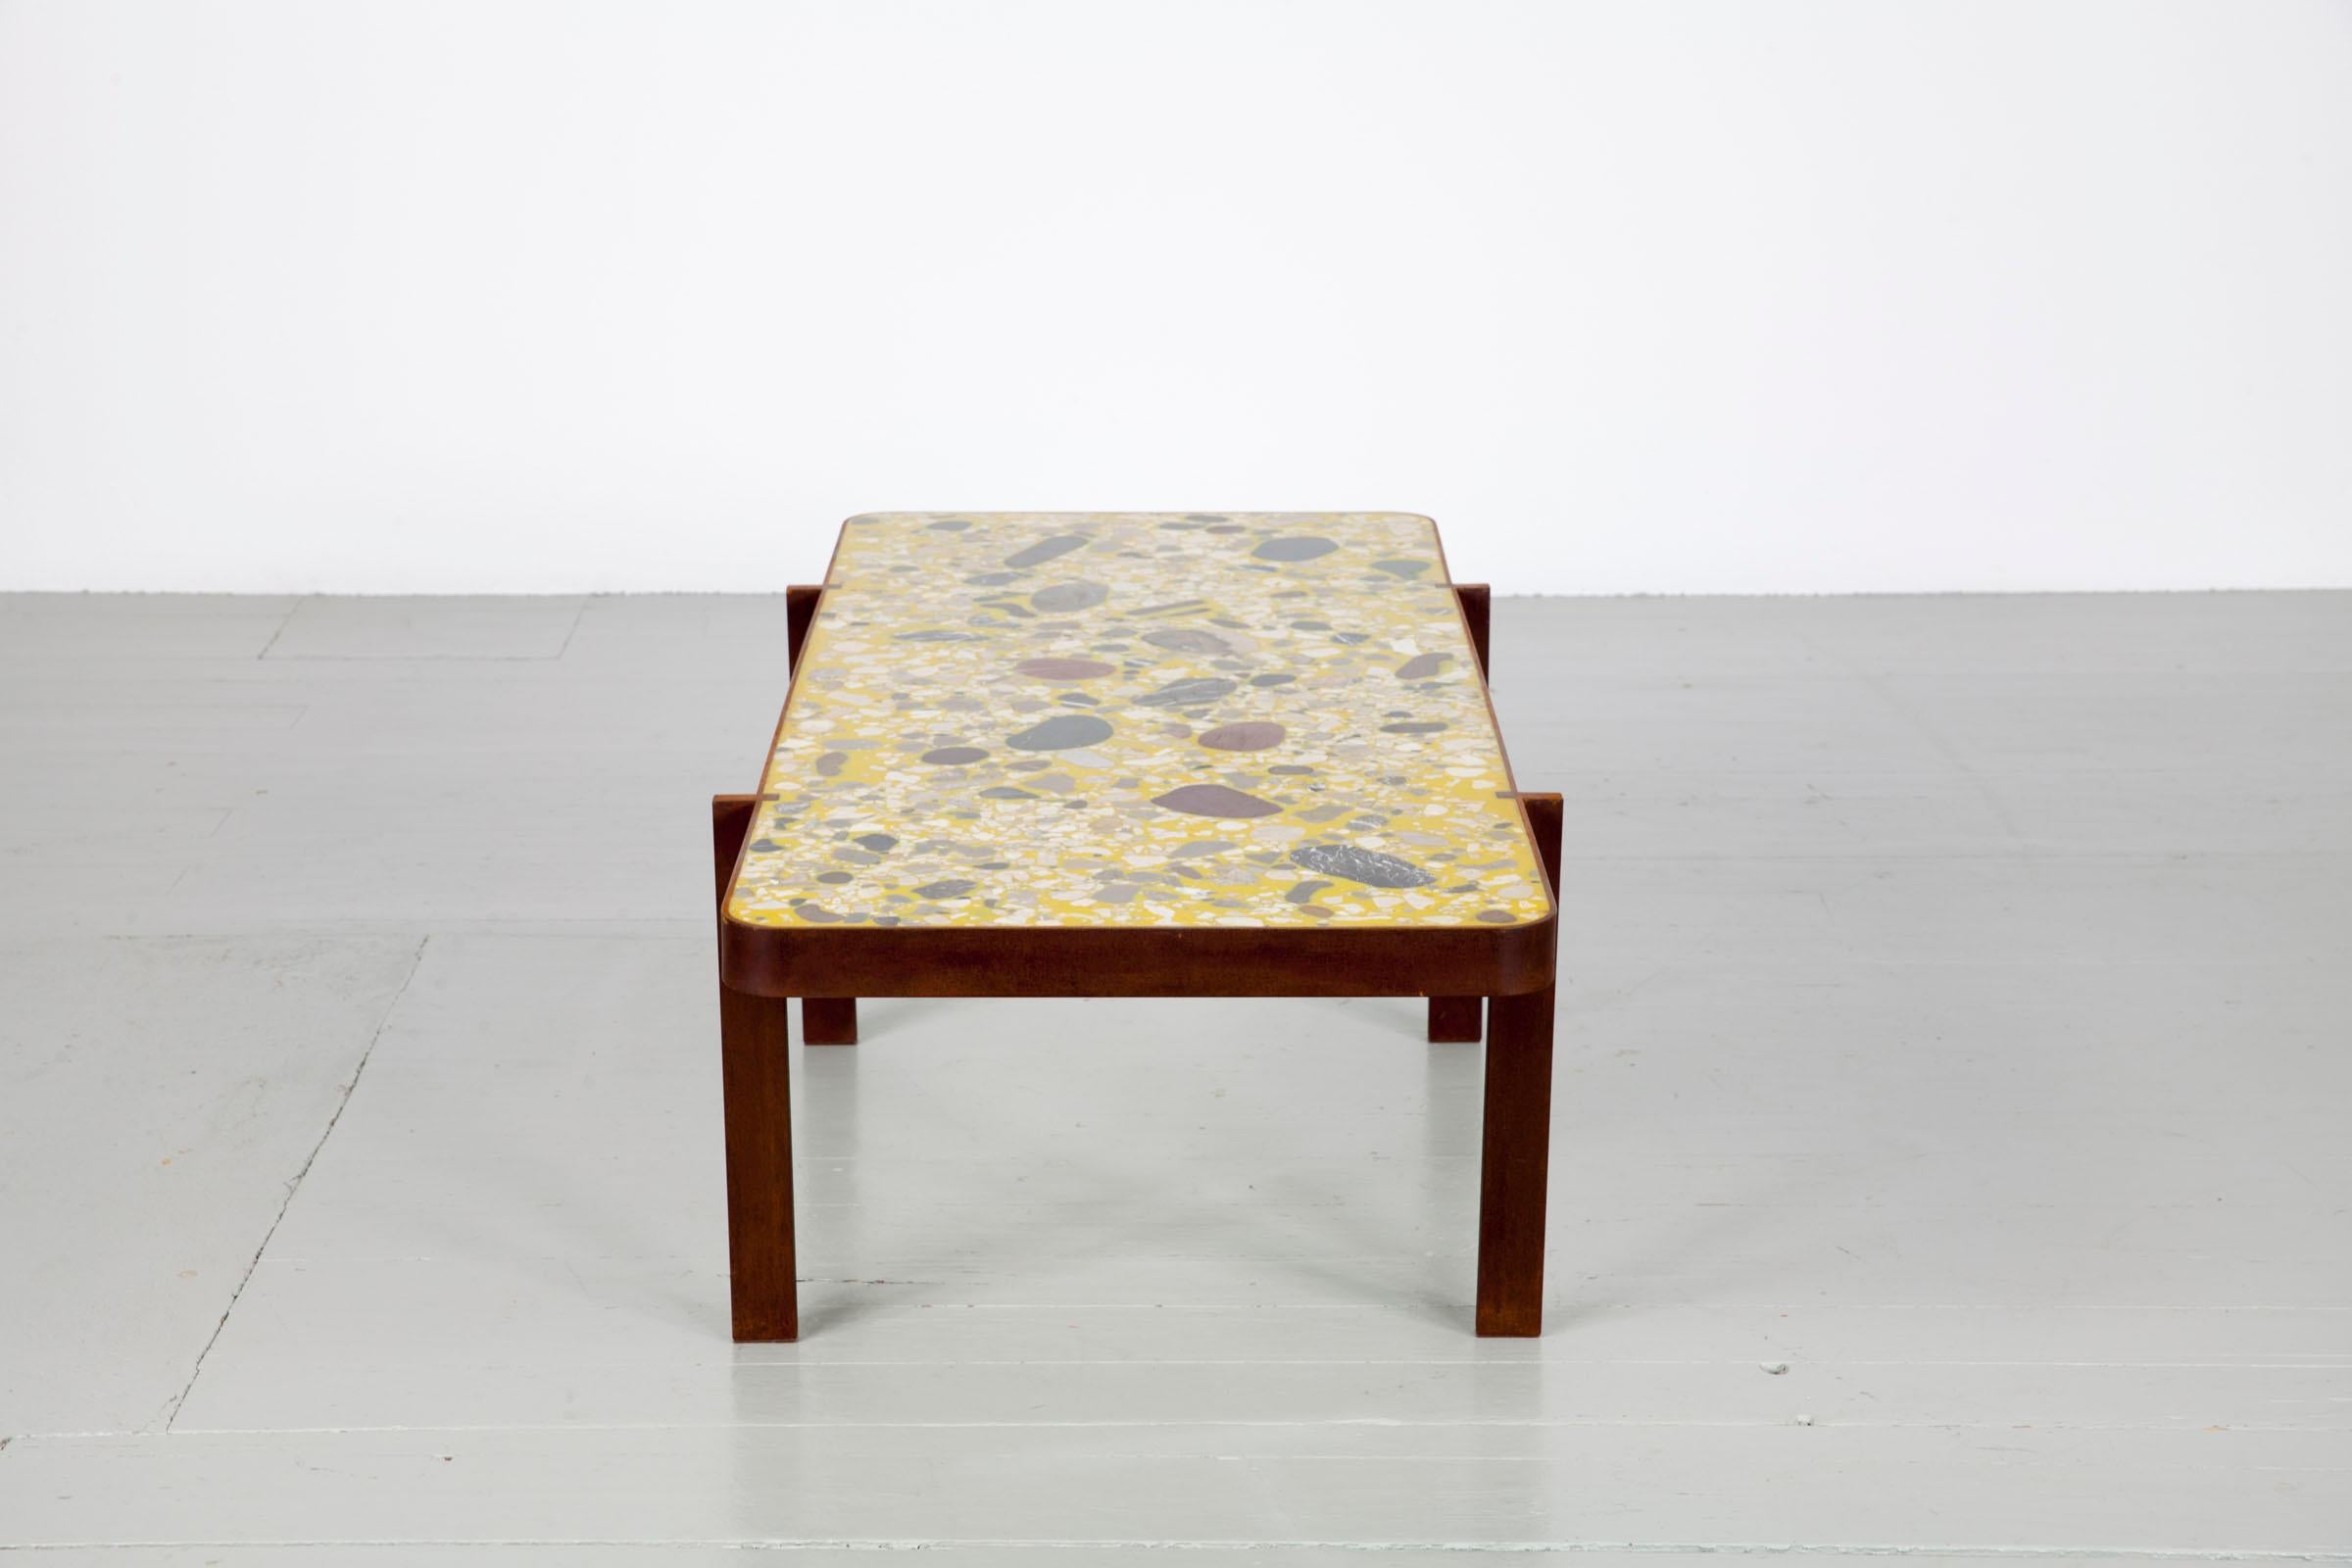 Austrian Felix Muhrhofer Contemporary Terrazzo Table with Corroded Steel Construction For Sale